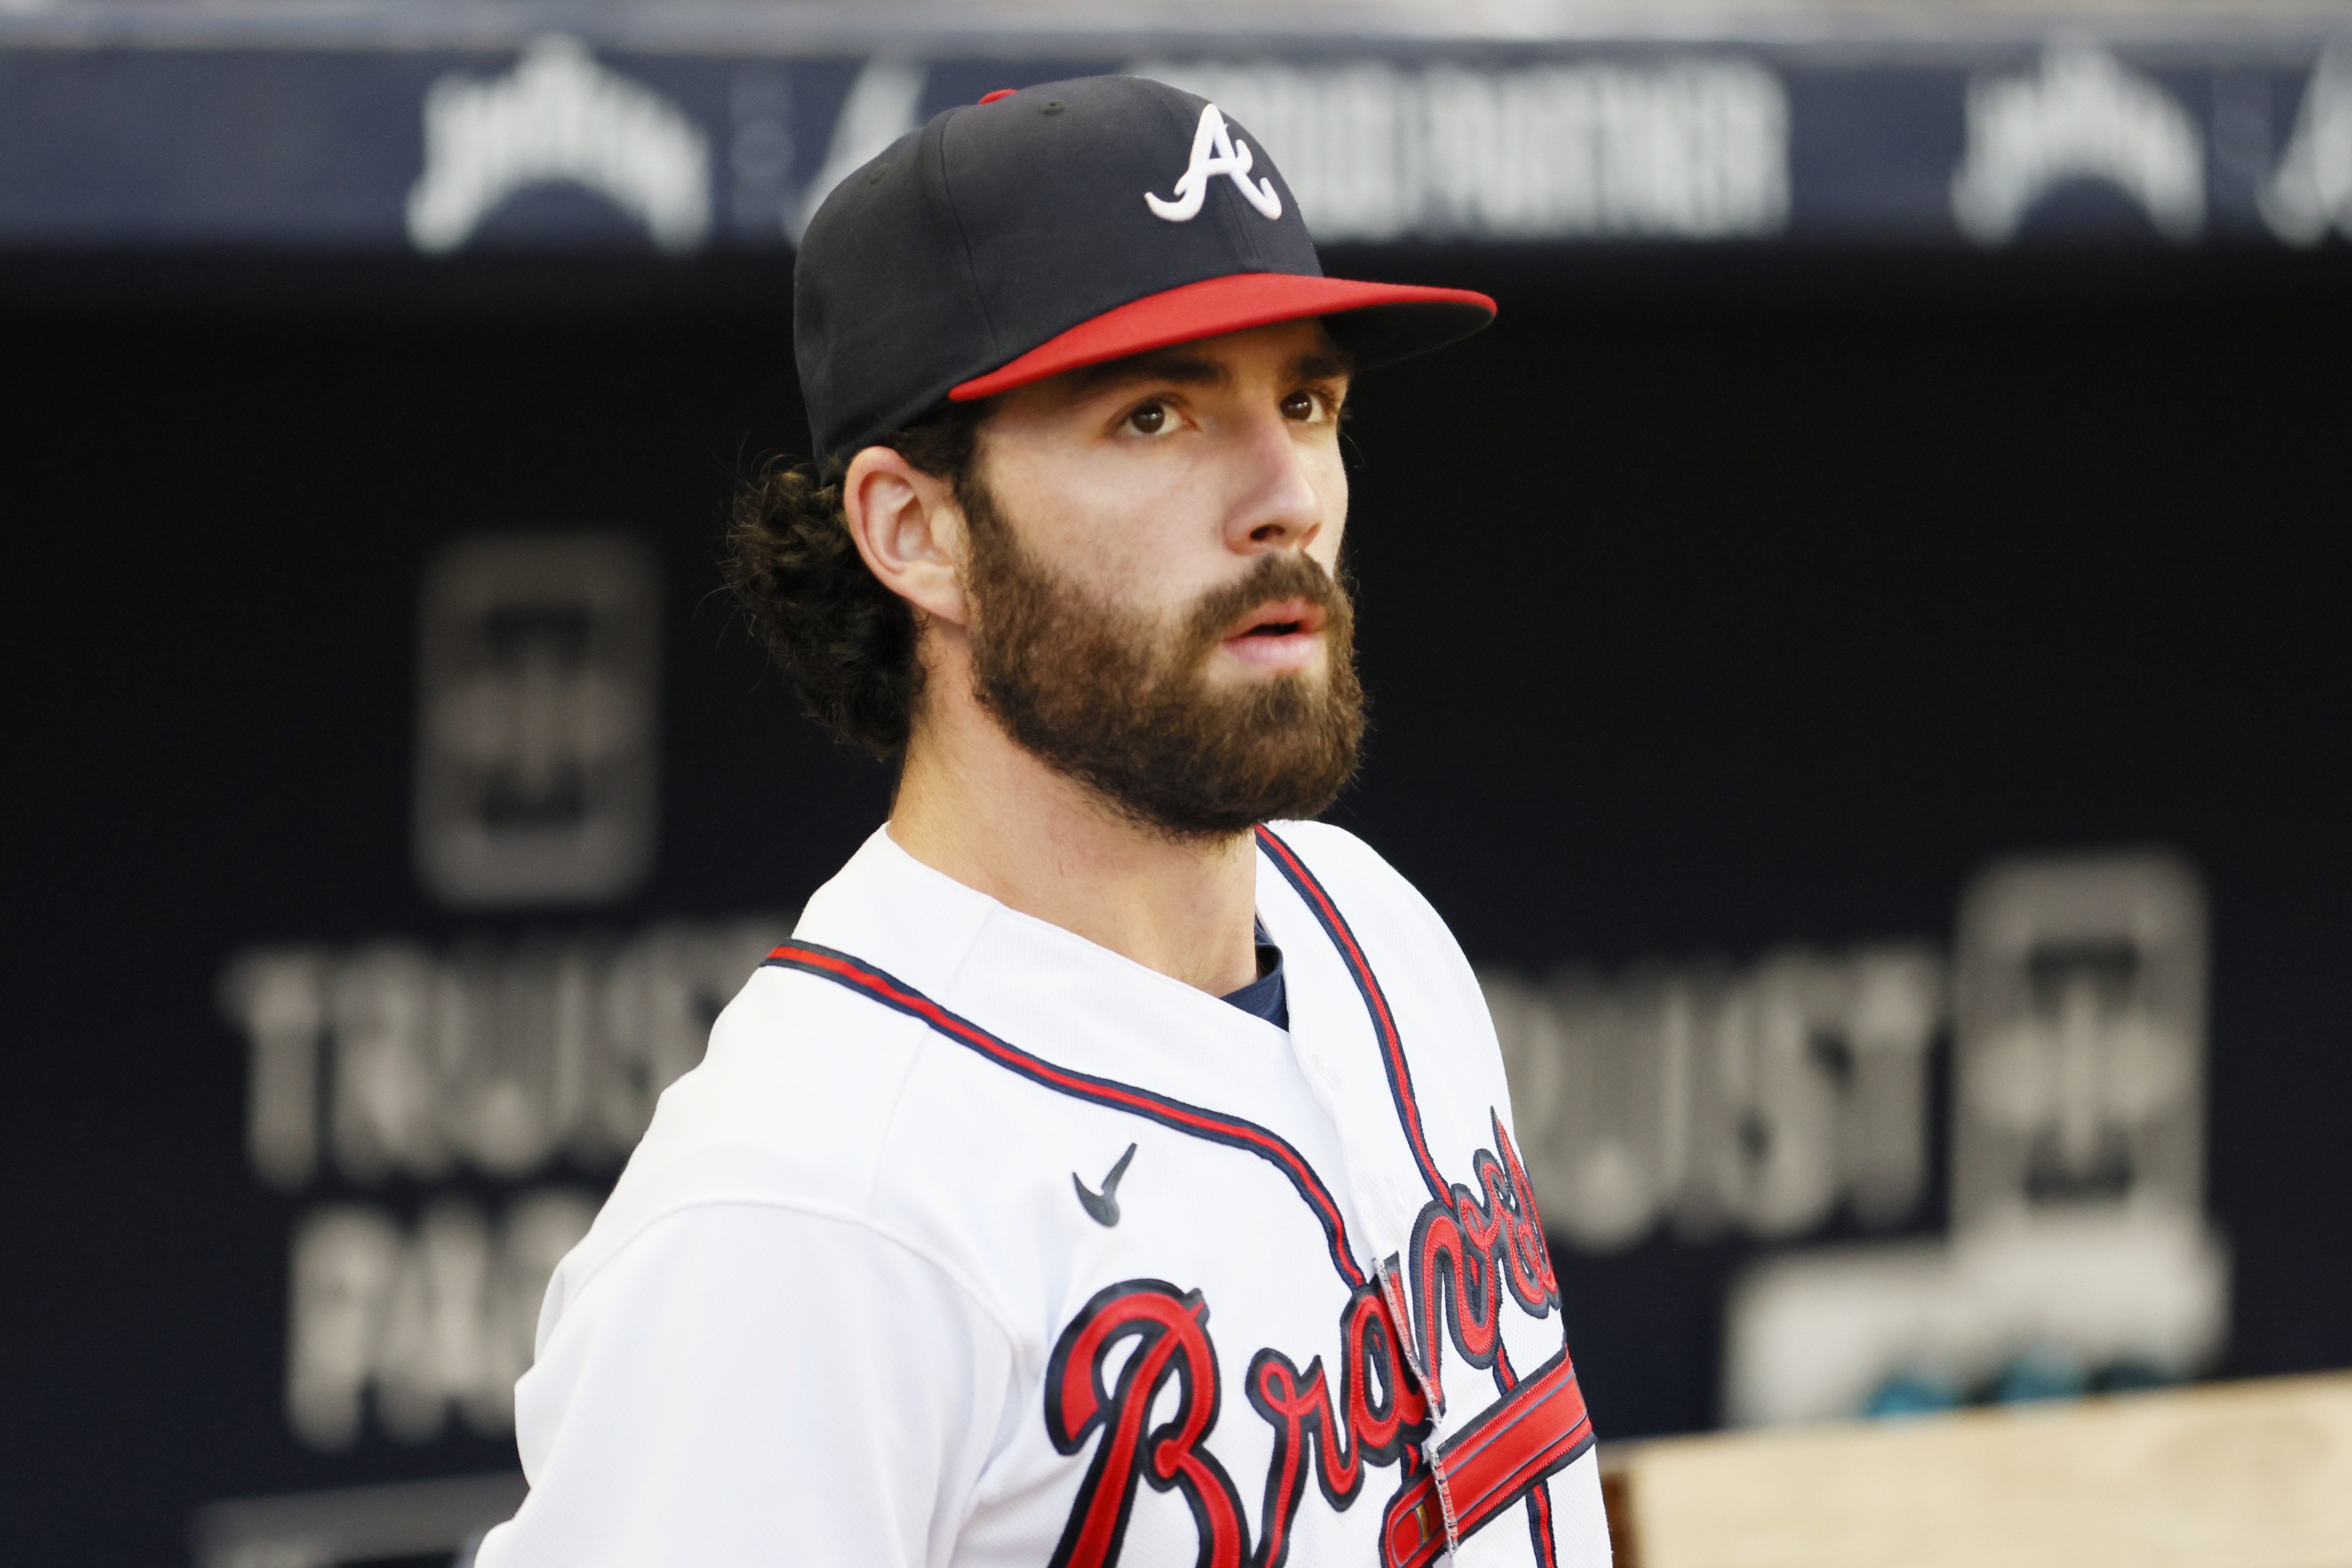 Braves News: Dansby Swanson rejects qualifying offer, is now a